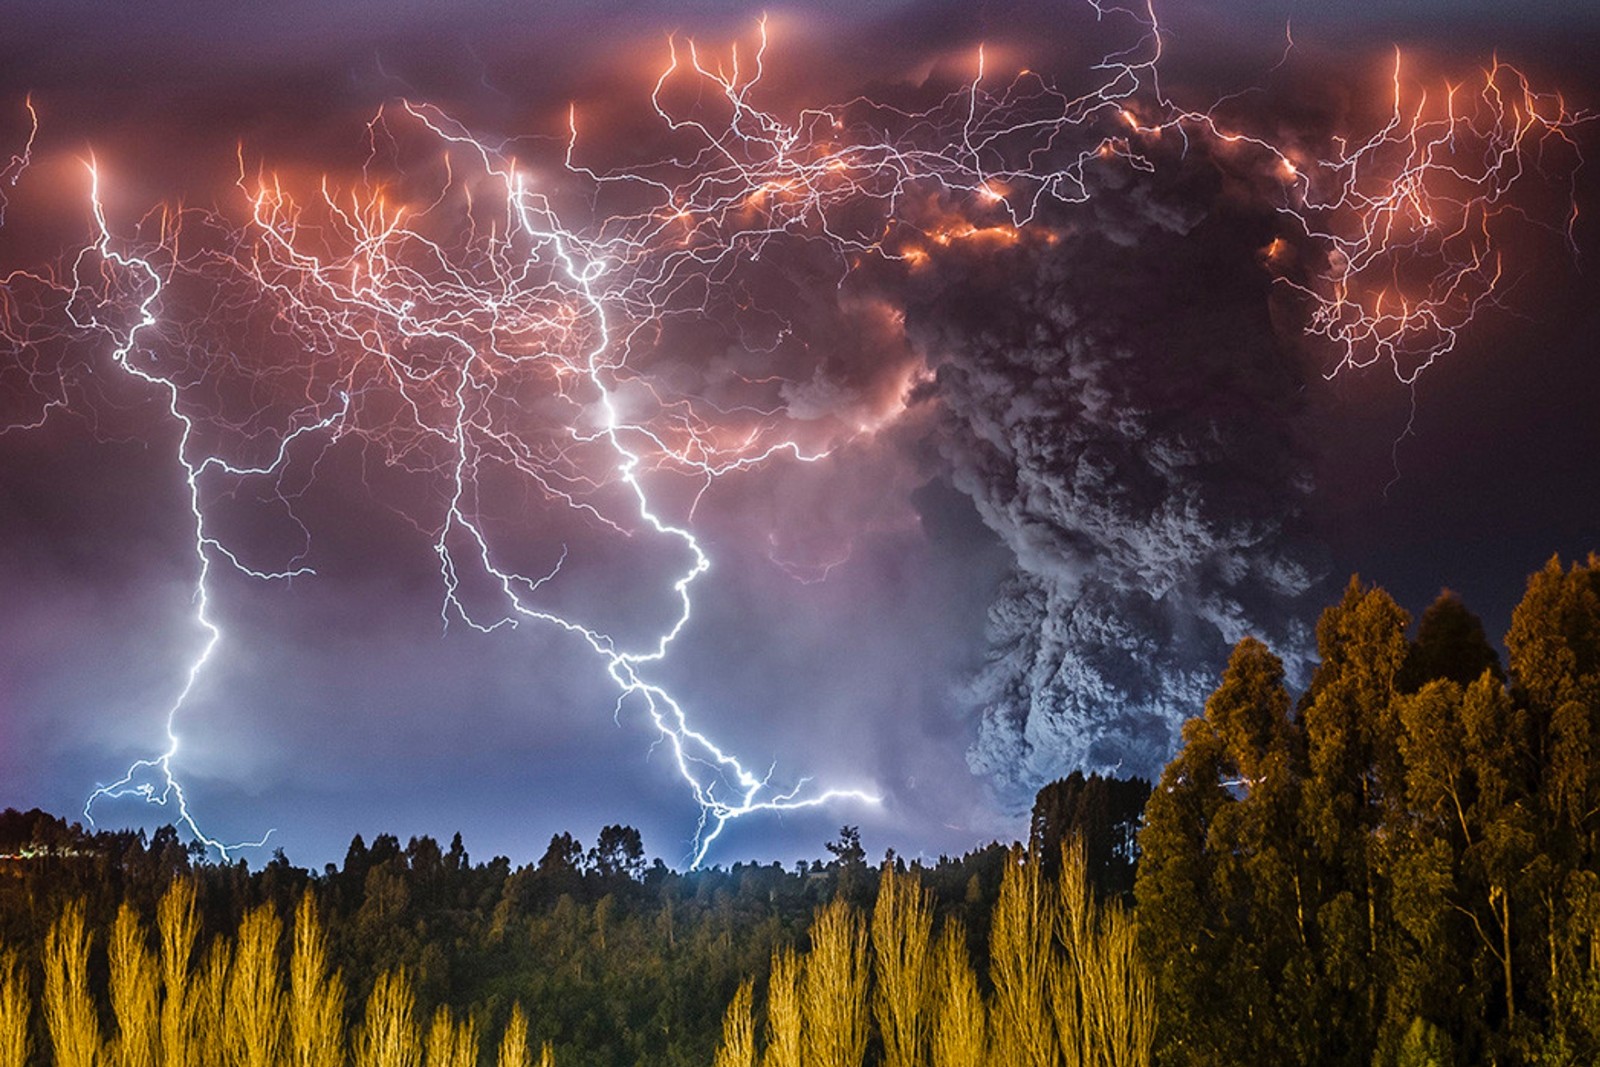 General 1600x1067 photography nature landscape lightning storm forest volcano night eruption Chile South America